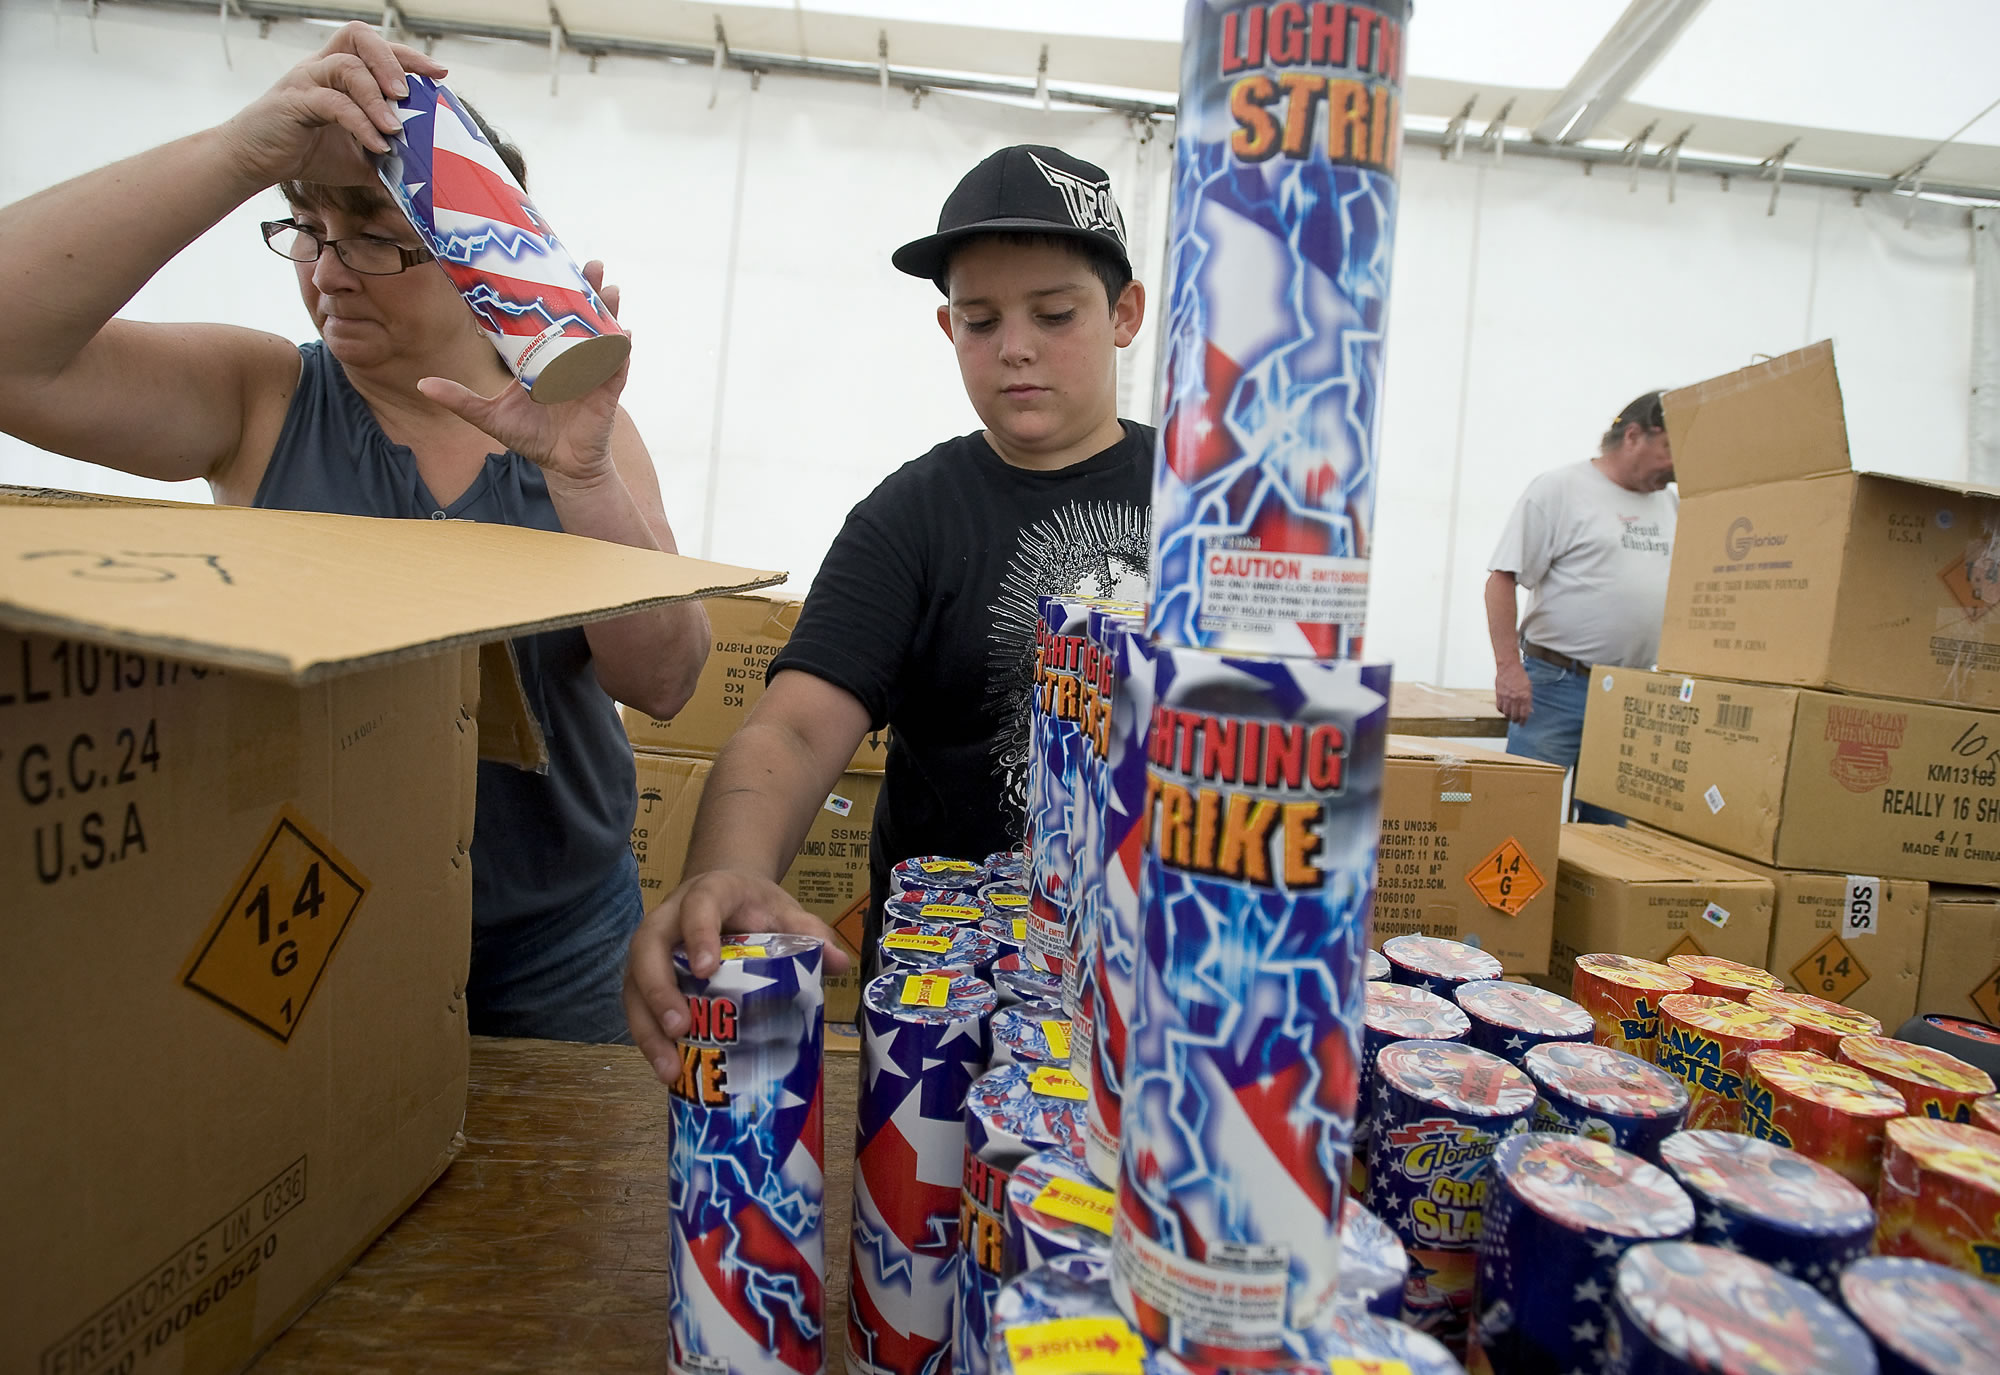 Jenifer Phillips of Vancouver and John Soares of Phoenix, Ariz., stock fireworks at the Wounded Warrior fireworks stand last year.